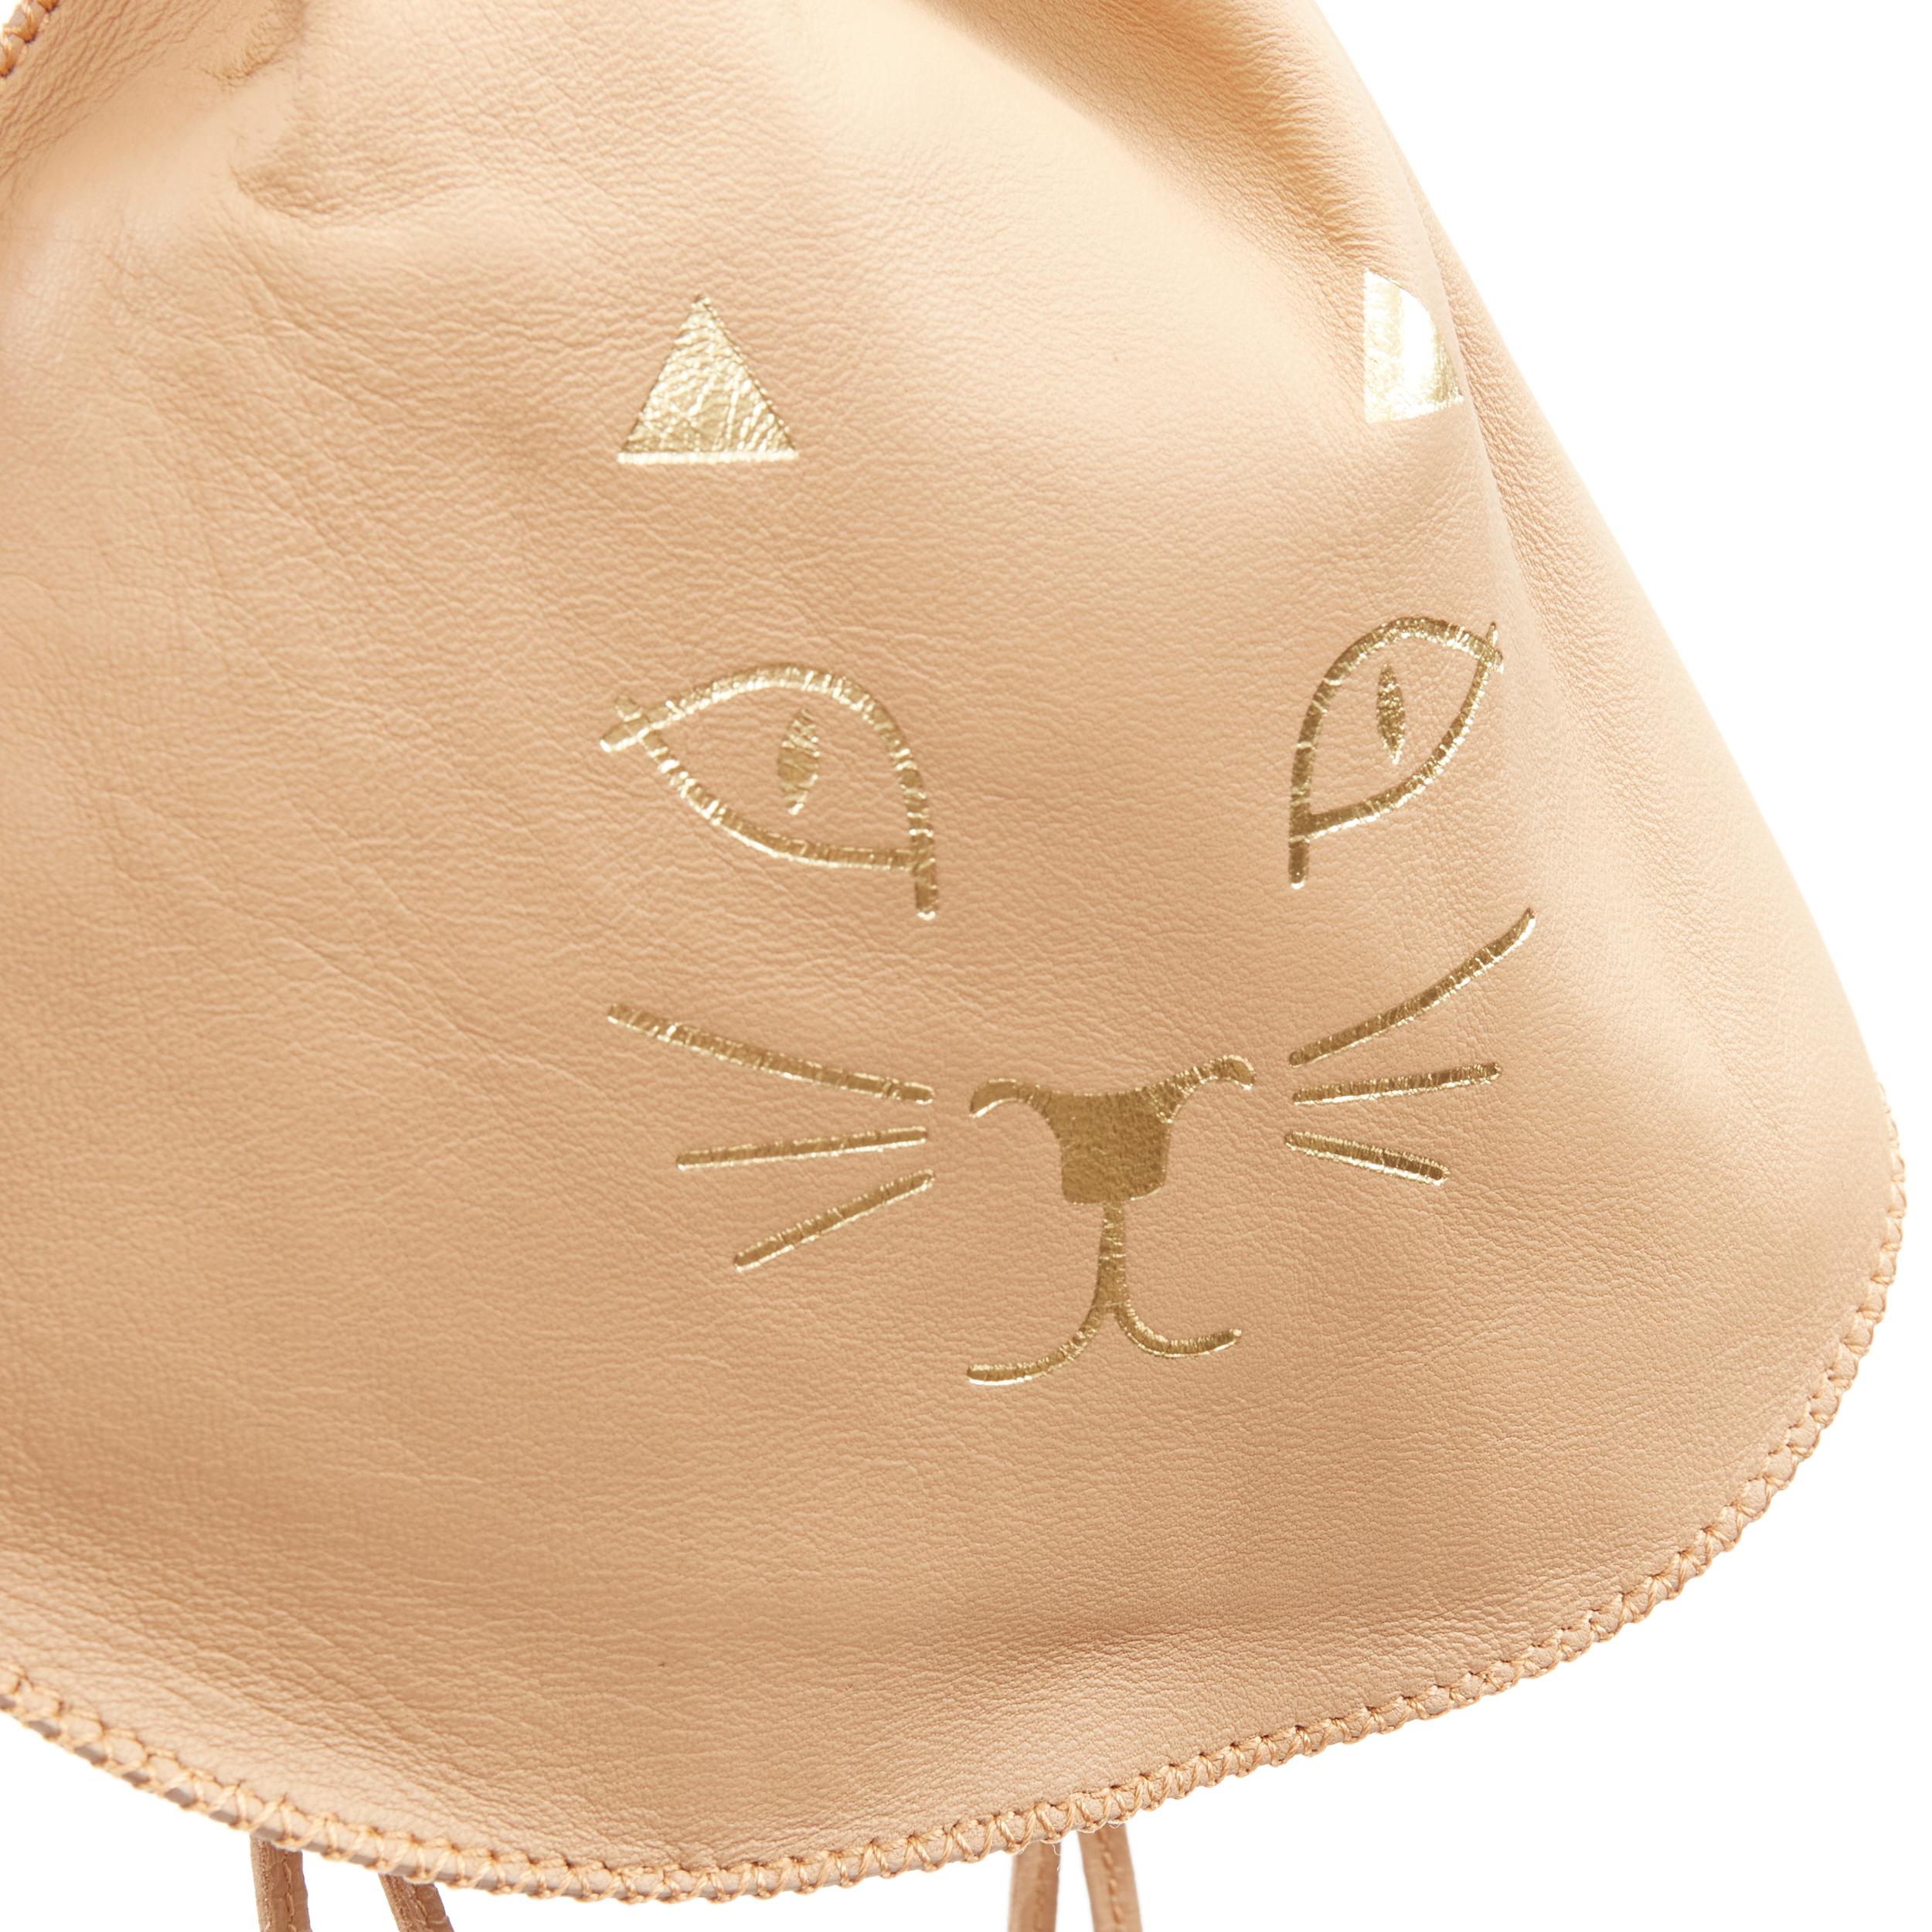 Women's CHARLOTTE OLYMPIA Precious Pouch gold Kitty print tan leather drawstring bag For Sale